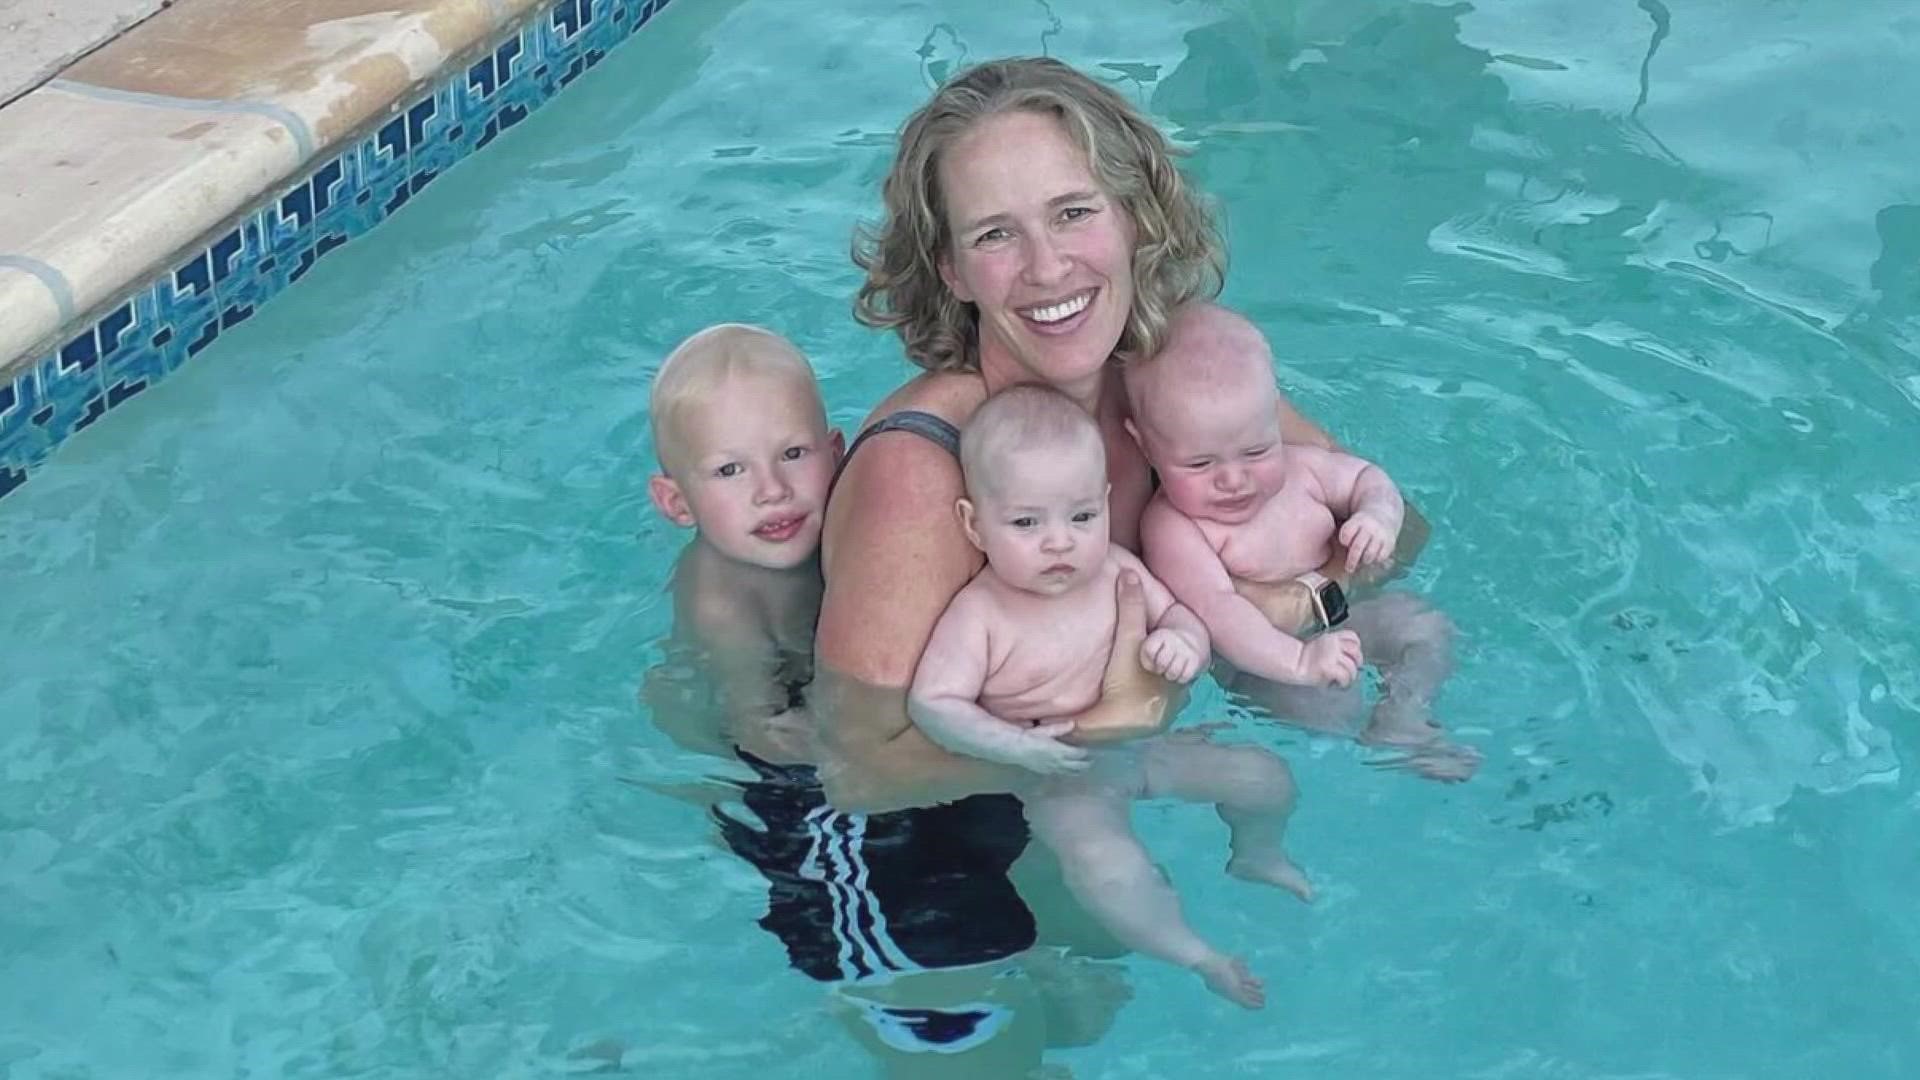 Marla Hudgens and her three young children were found dead Wednesday morning at the family's Phoenix home.